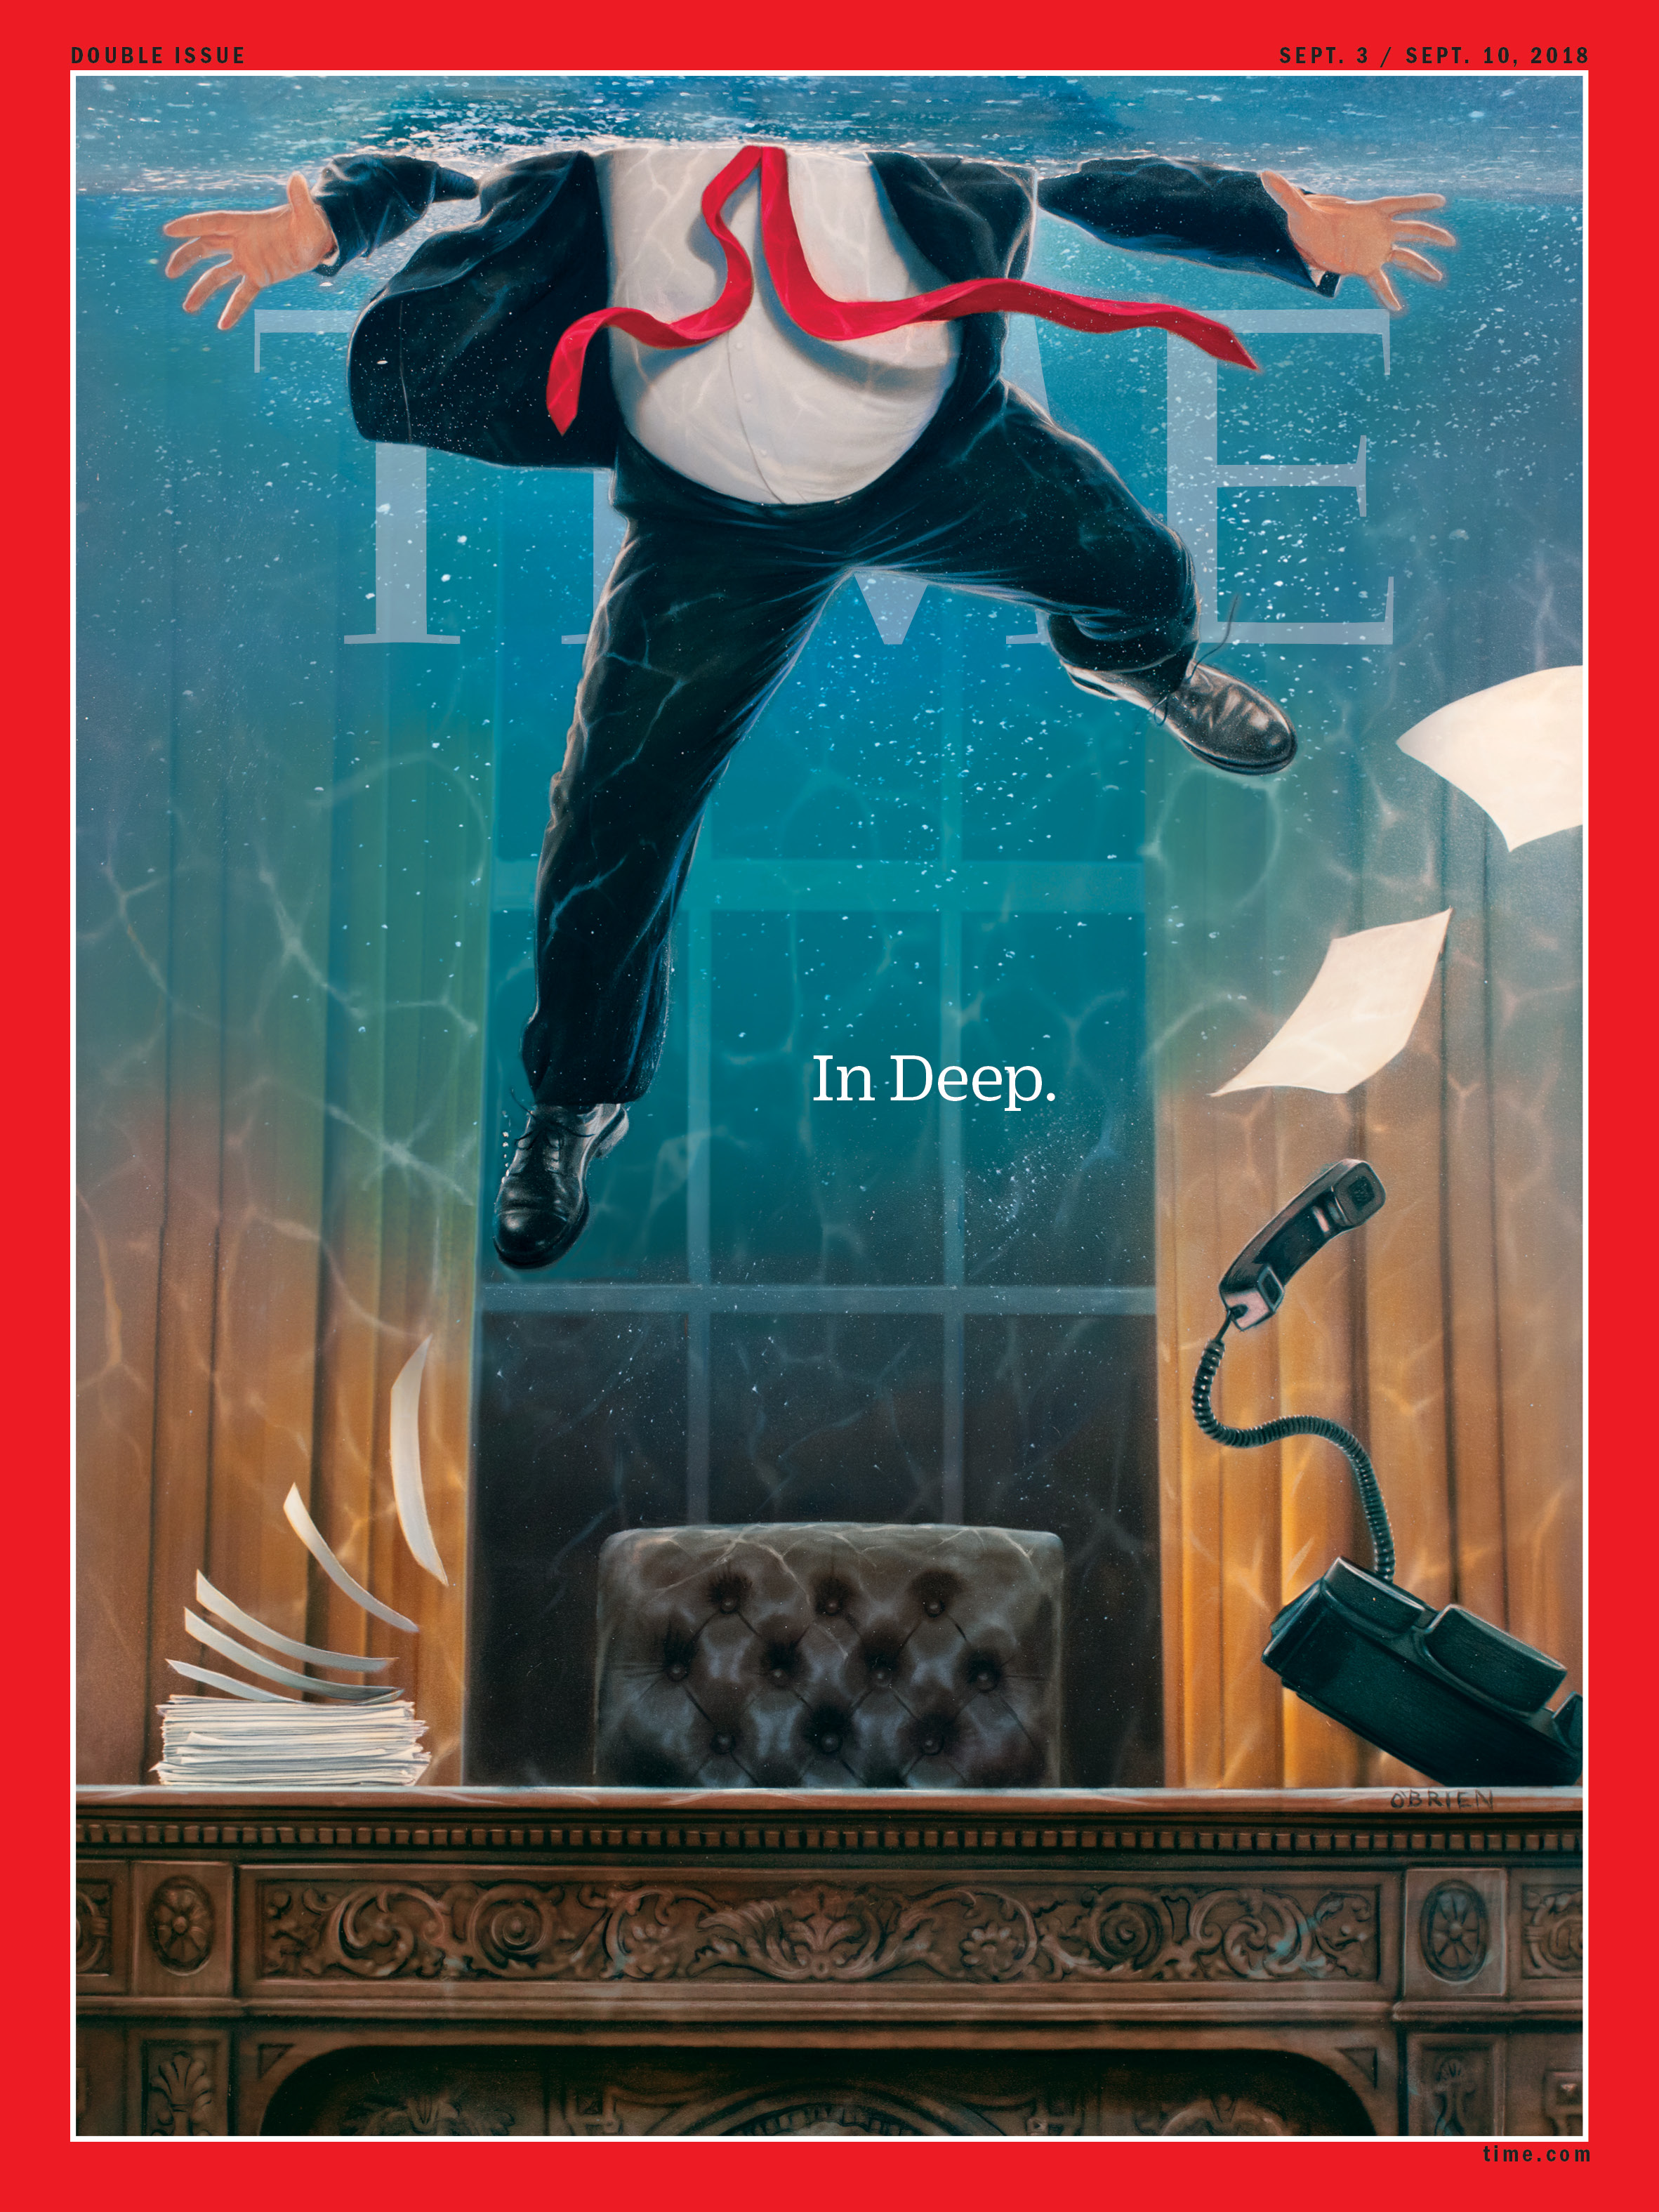 President Trump In Deep Time Magazine Cover